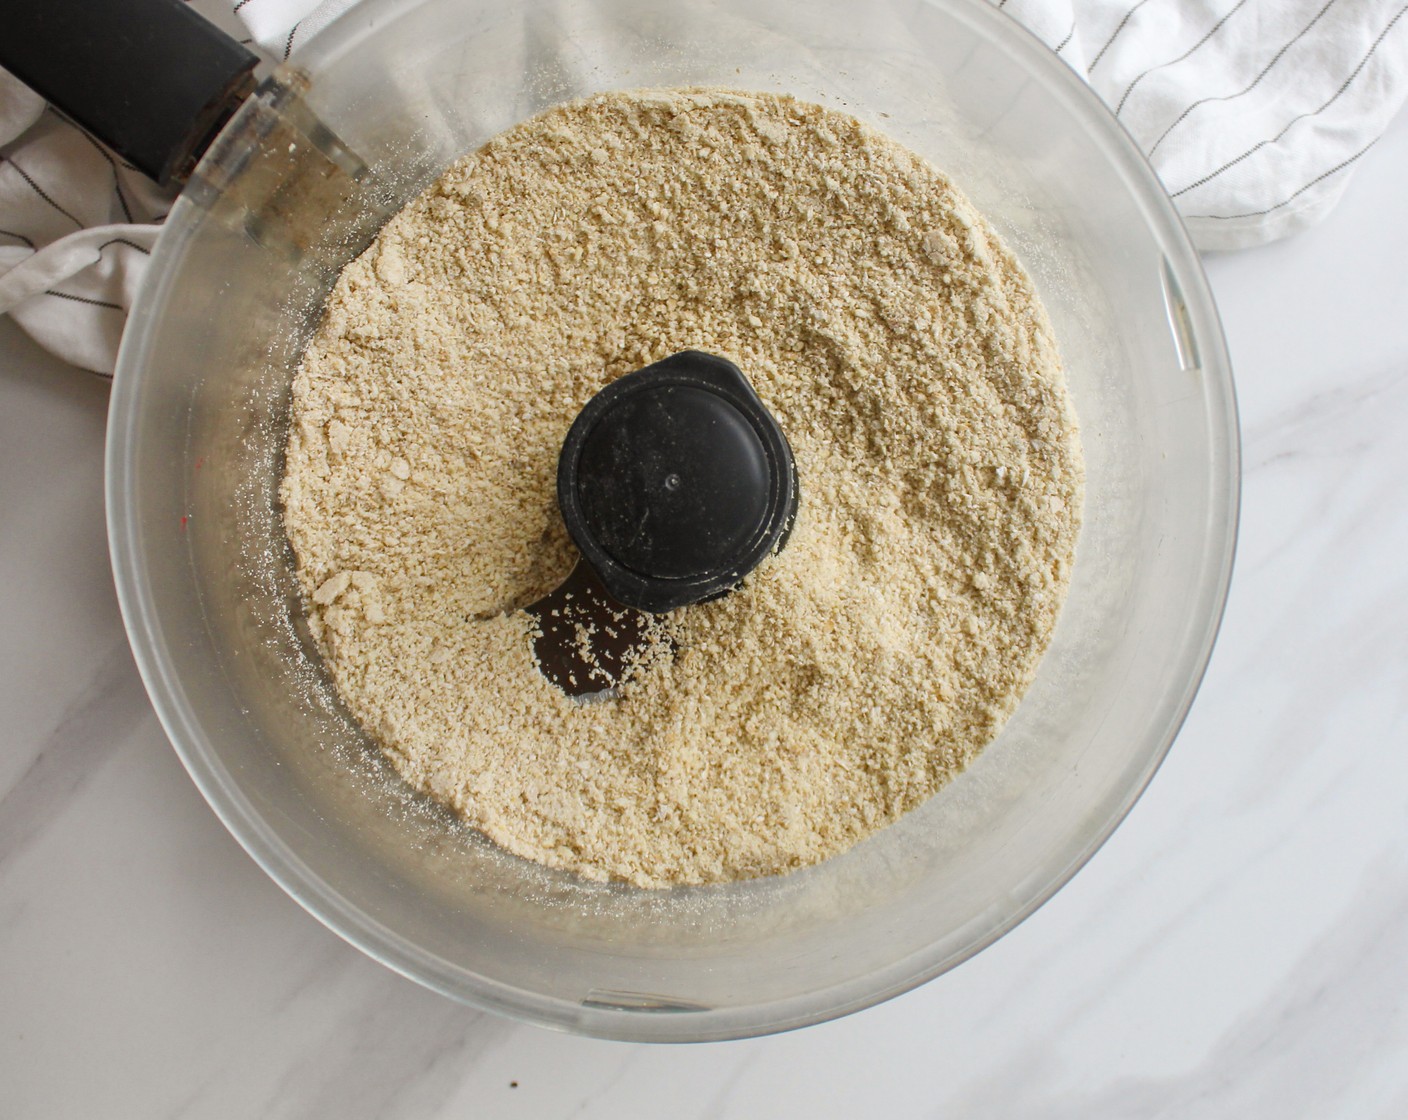 step 2 In a food processor or high-speed blender, blend together Old Fashioned Rolled Oats (1 cup) and Raw Cashews (1 cup) until fine powder forms.